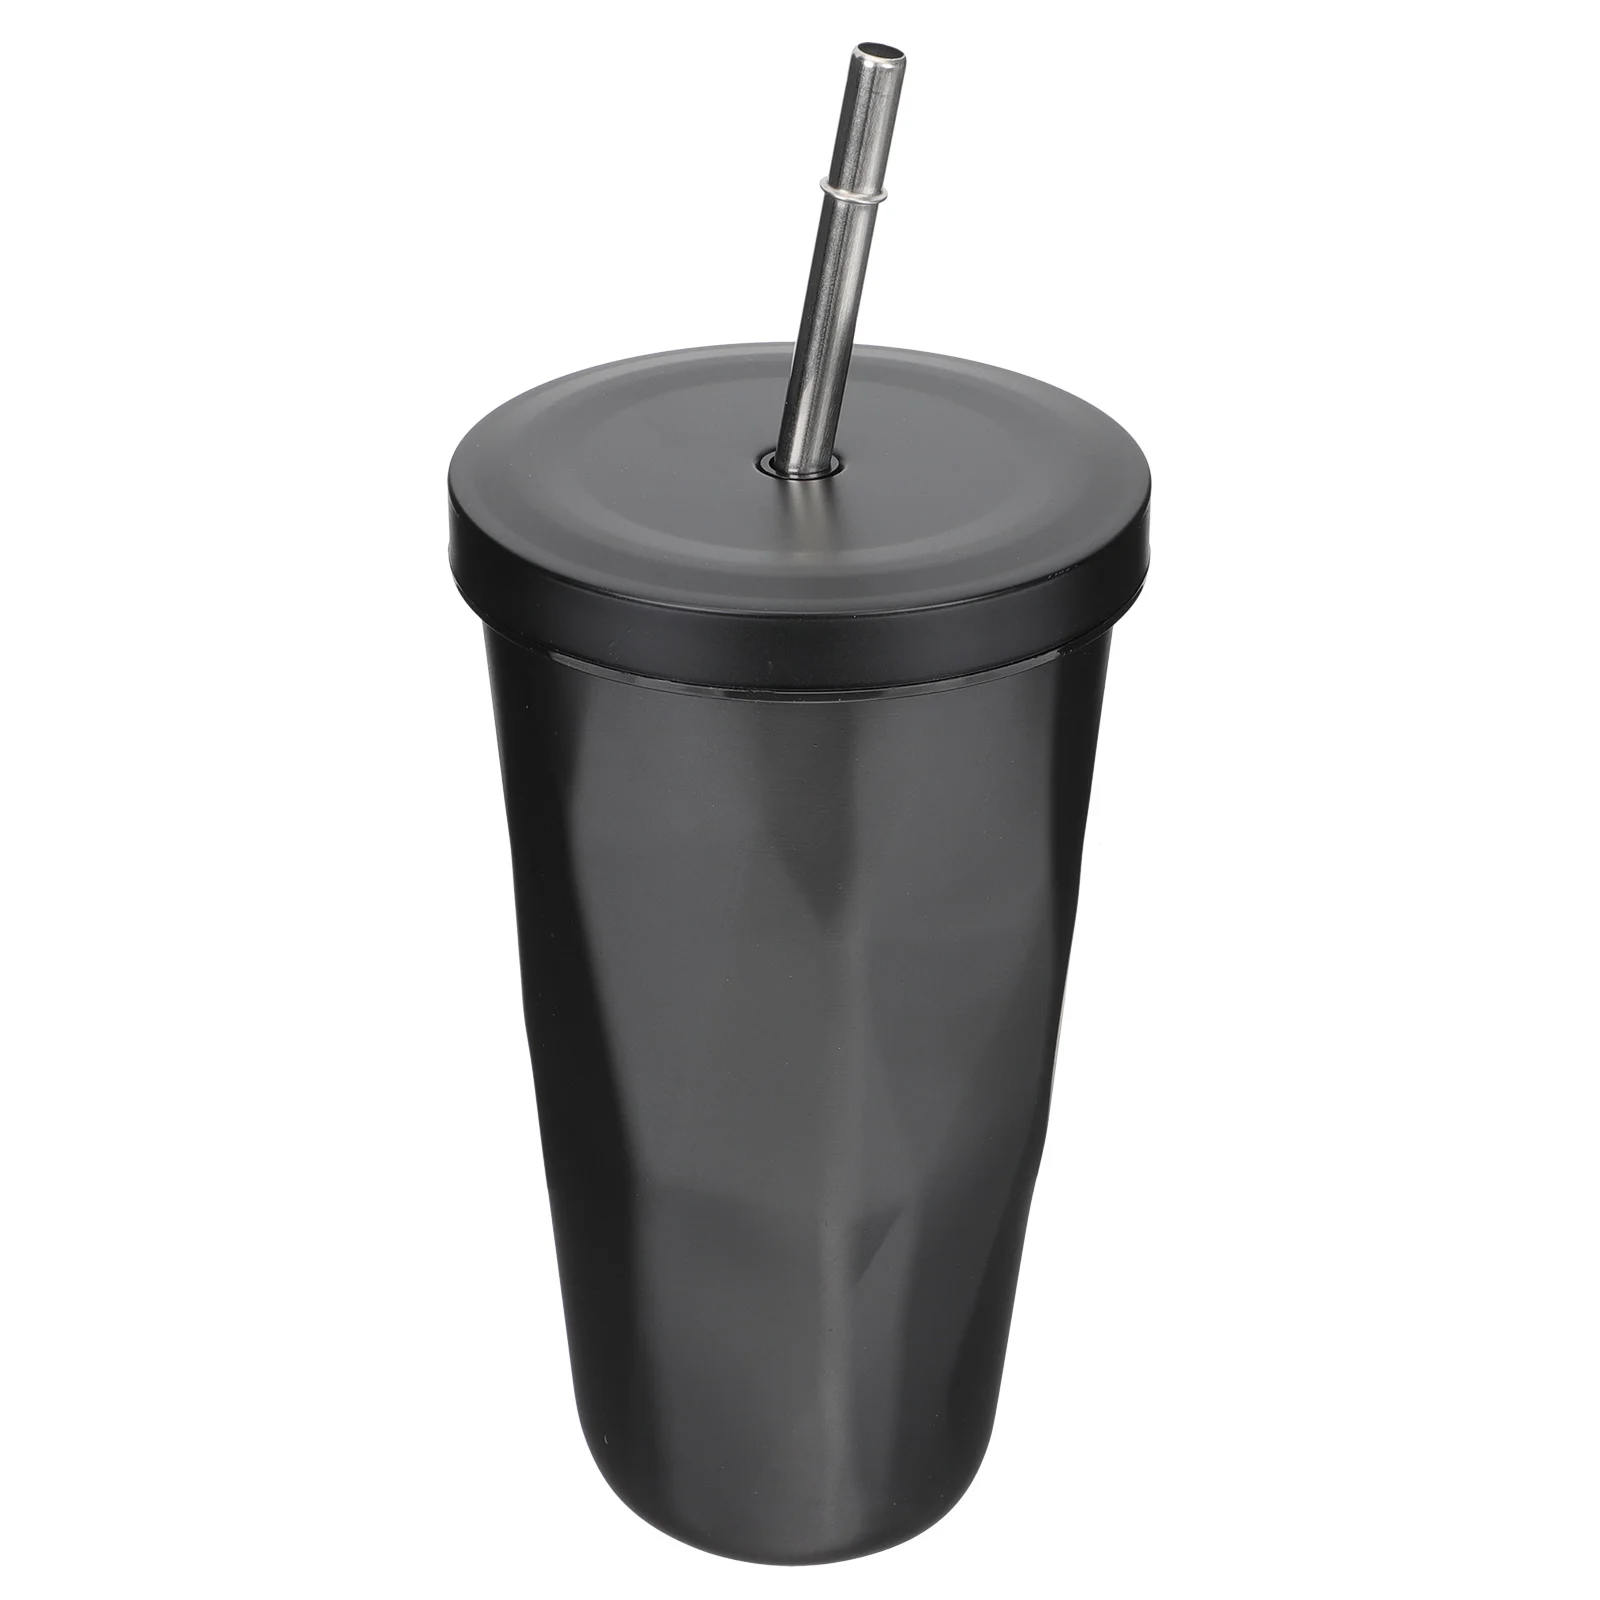 

Tumbler Cup Cups Straw Steel Insulated Coffee Mug Stainless Lids Travel Oz Drinking Straws Tumblers Kids Metal Sippy Water Mugs